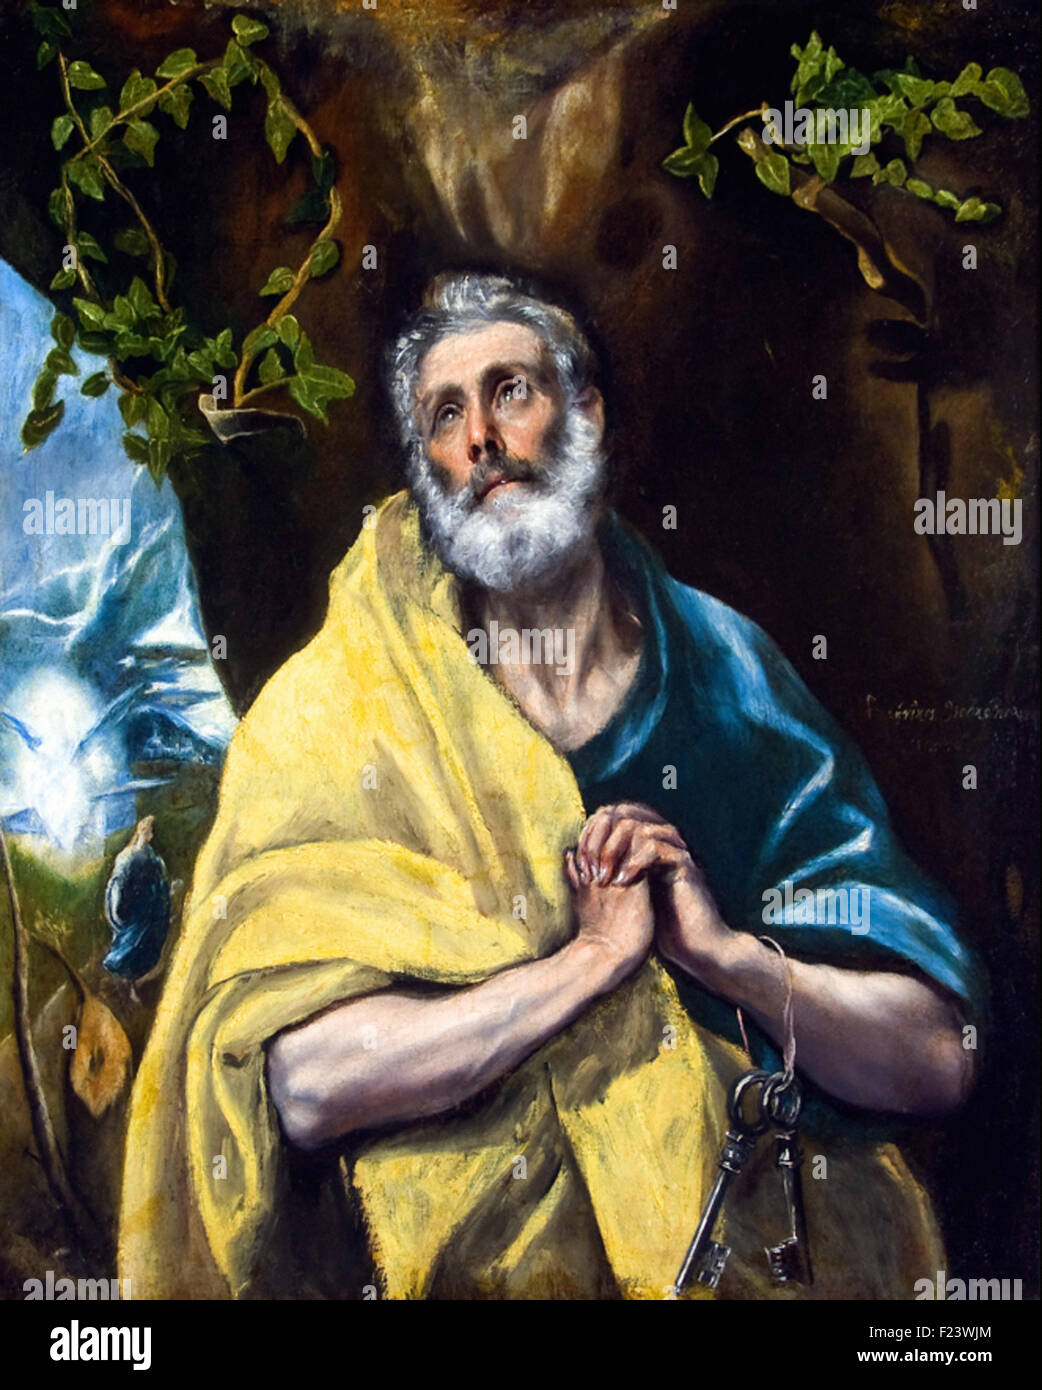 El Greco - The Tears of Saint Peter Stock Photo